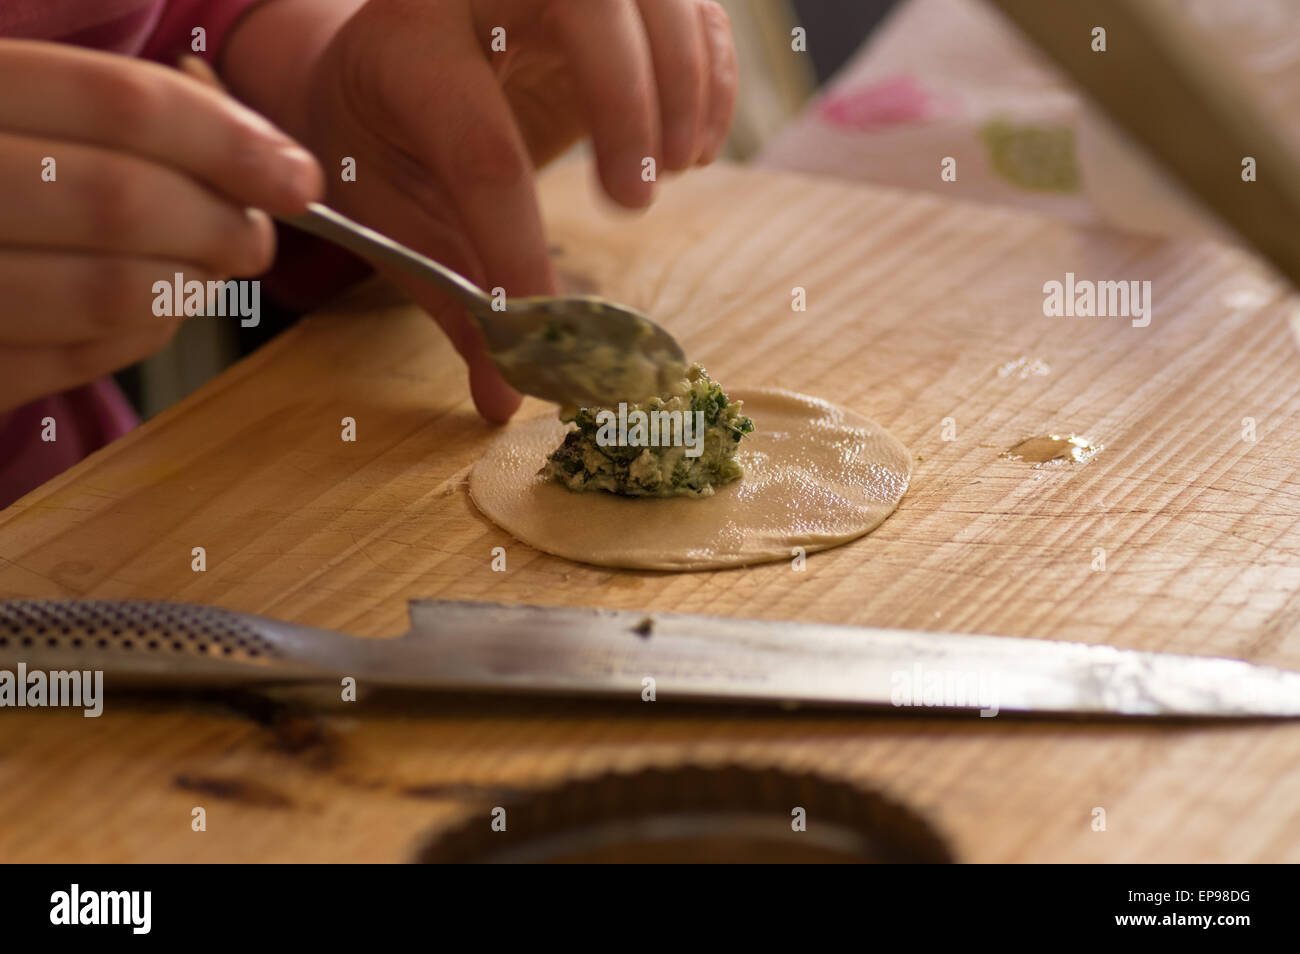 Putting the filling into home made Tortellini. Stock Photo